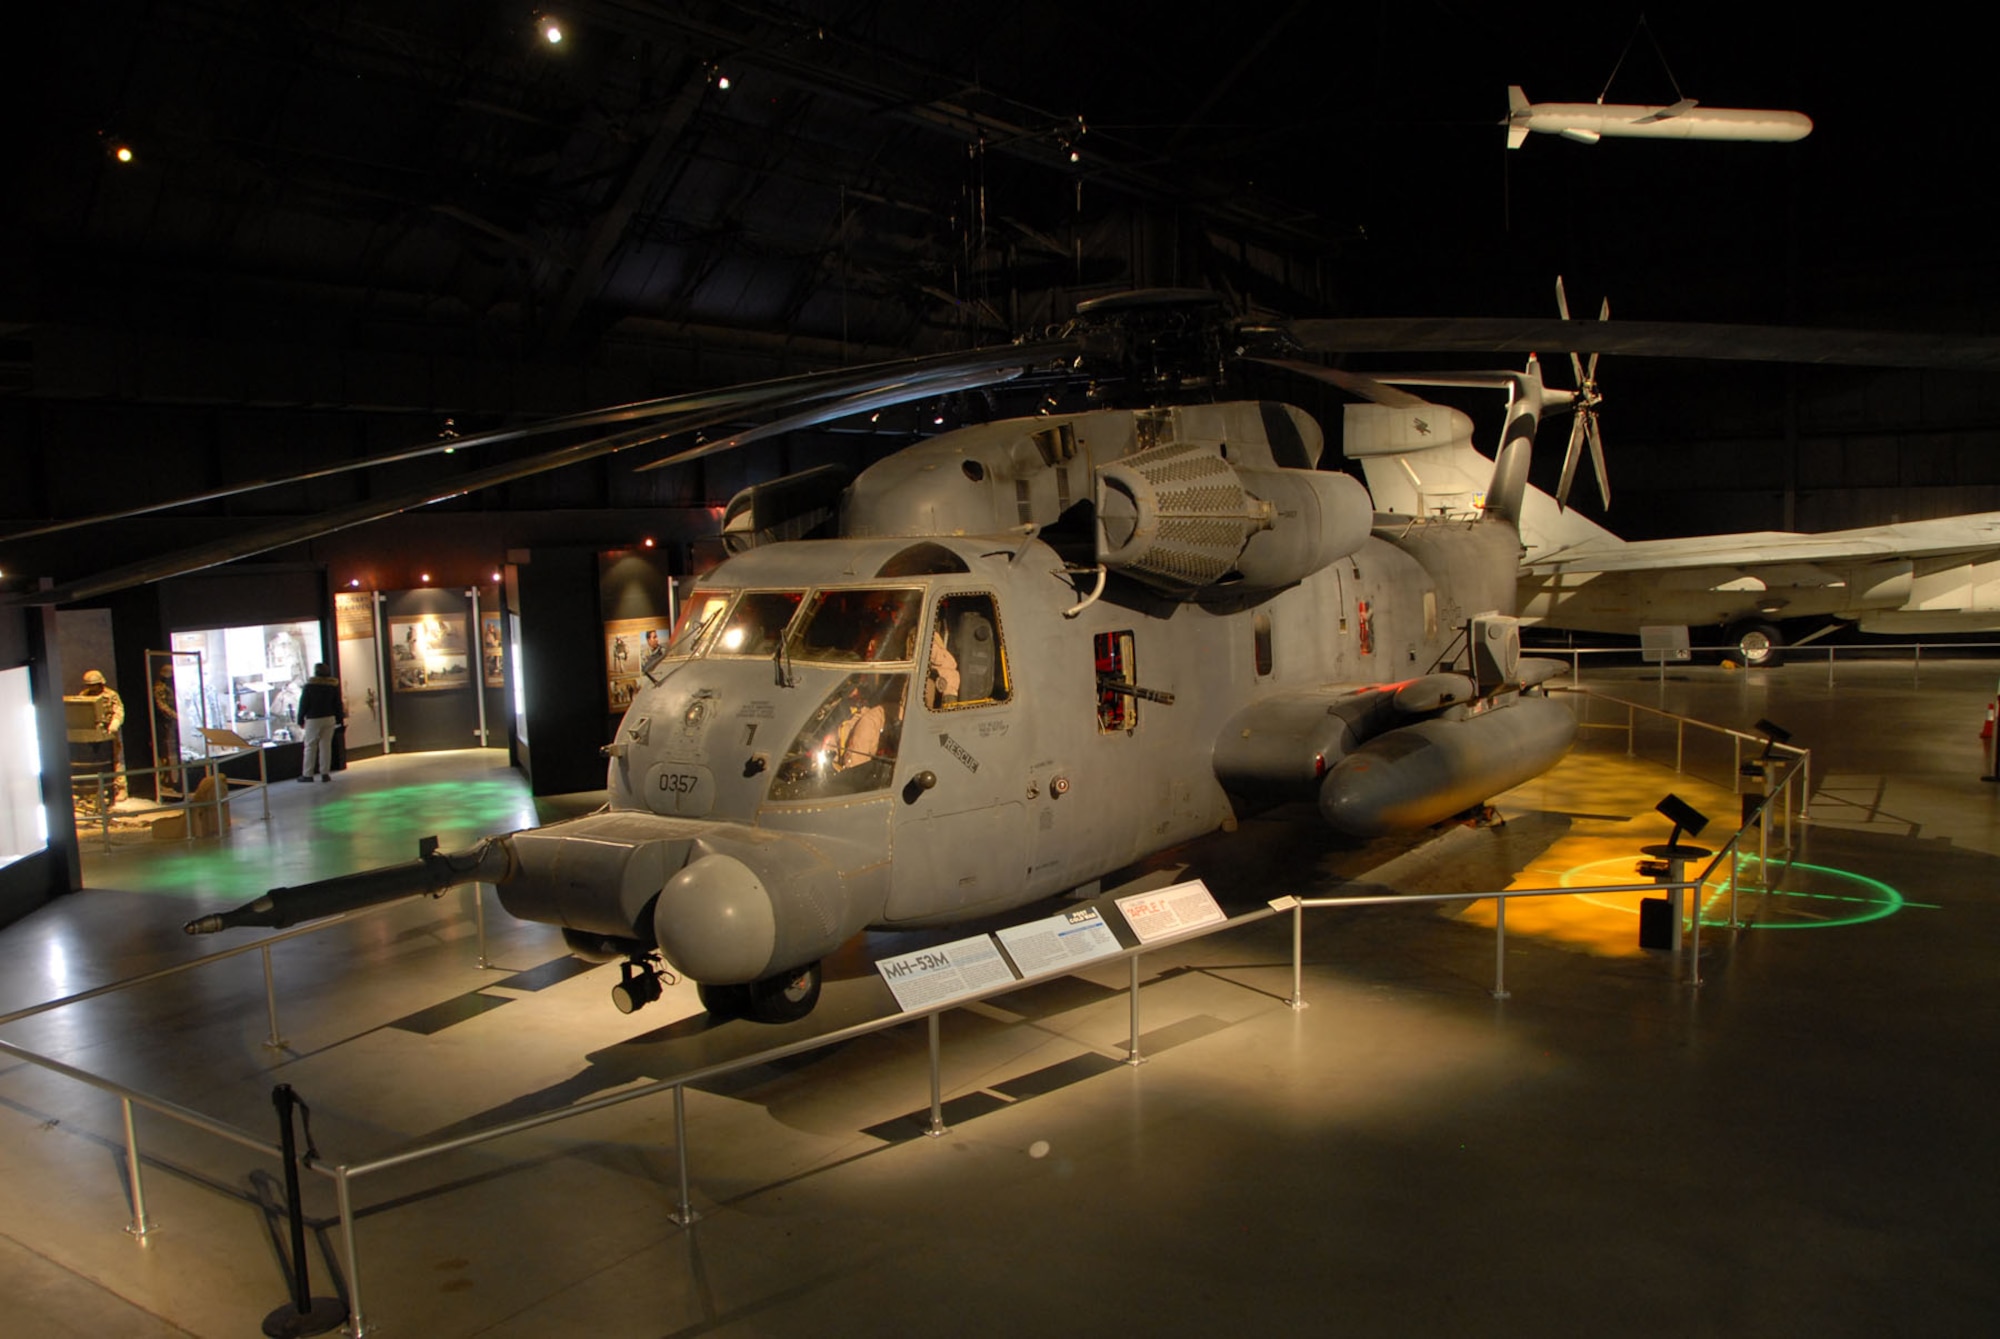 DAYTON, Ohio - The Warrior Airmen exhibit, including the MH-53, on display in the Cold War Gallery at the National Museum of the U.S. Air Force. (U.S. Air Force photo)